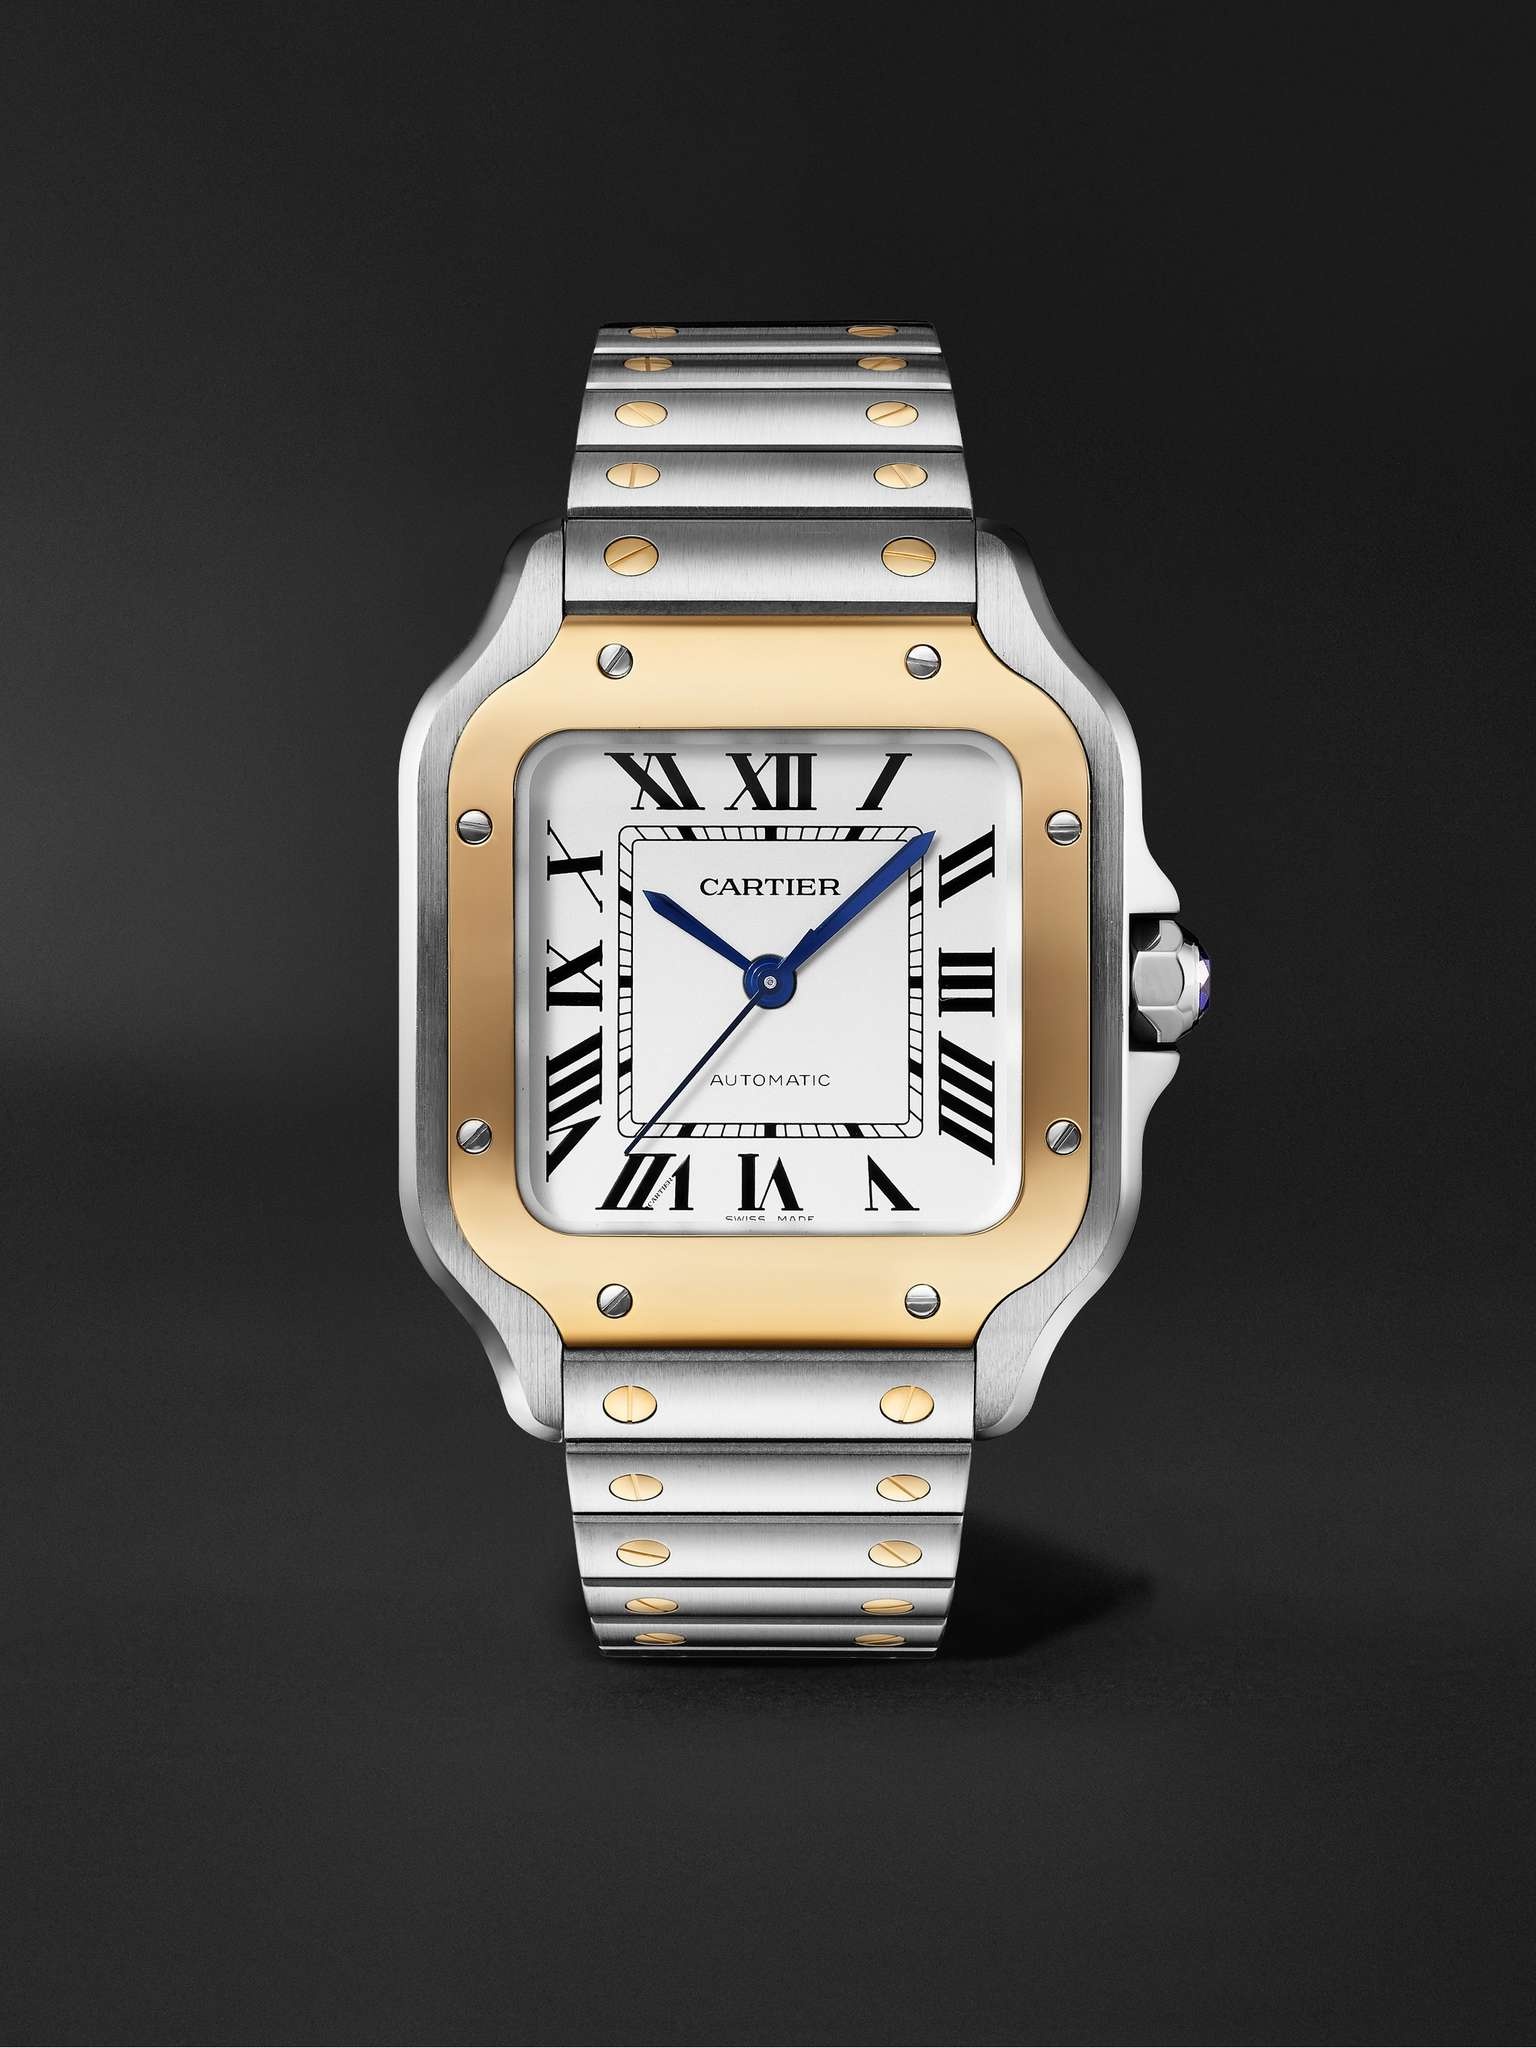 Santos de Cartier Automatic 35.1mm Interchangeable 18-Karat Gold, Stainless Steel and Leather Watch, - 1